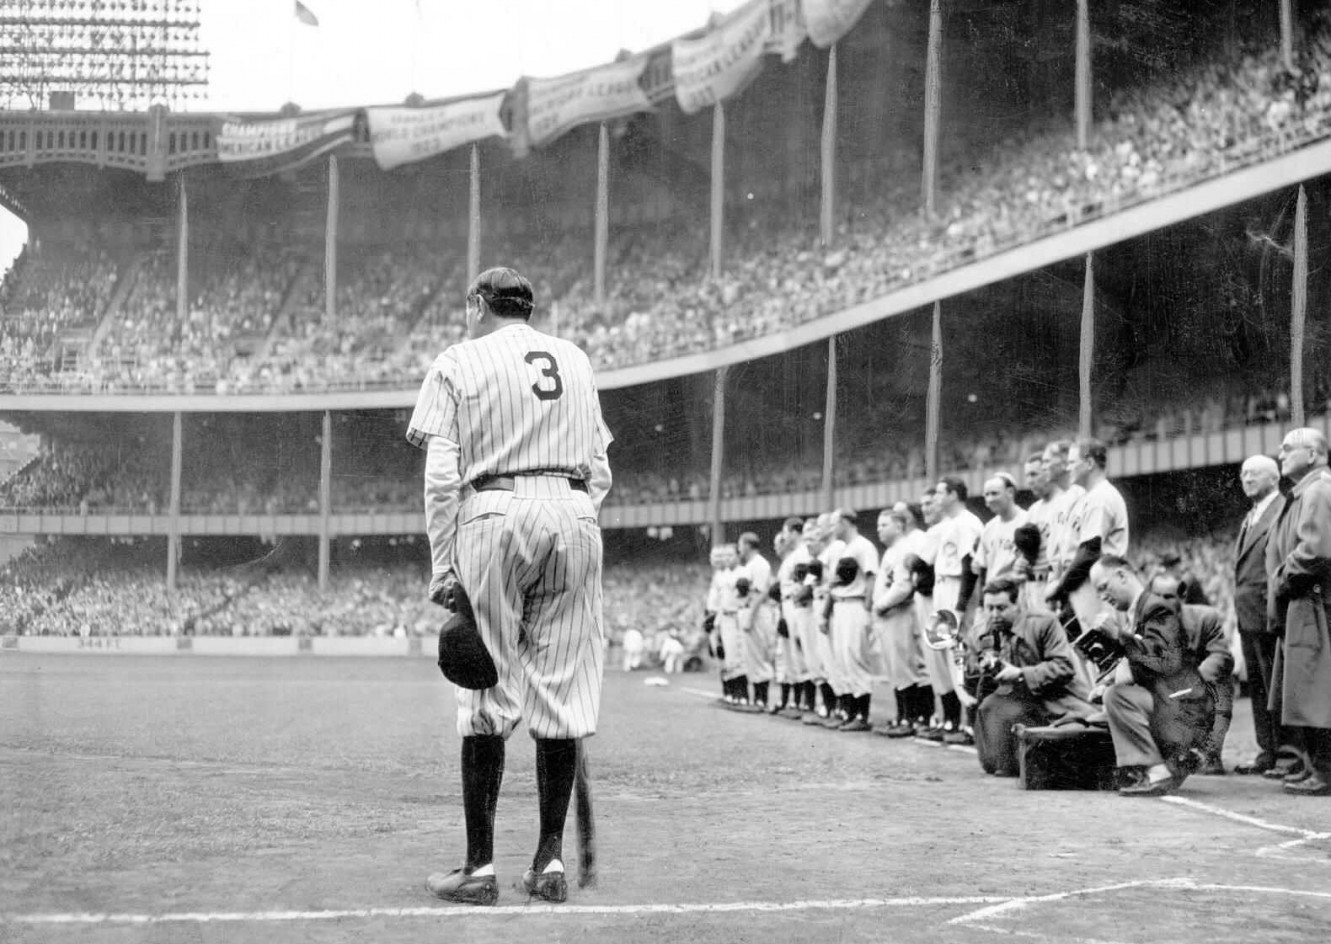 75 years since the death of Babe Ruth — AP Photos